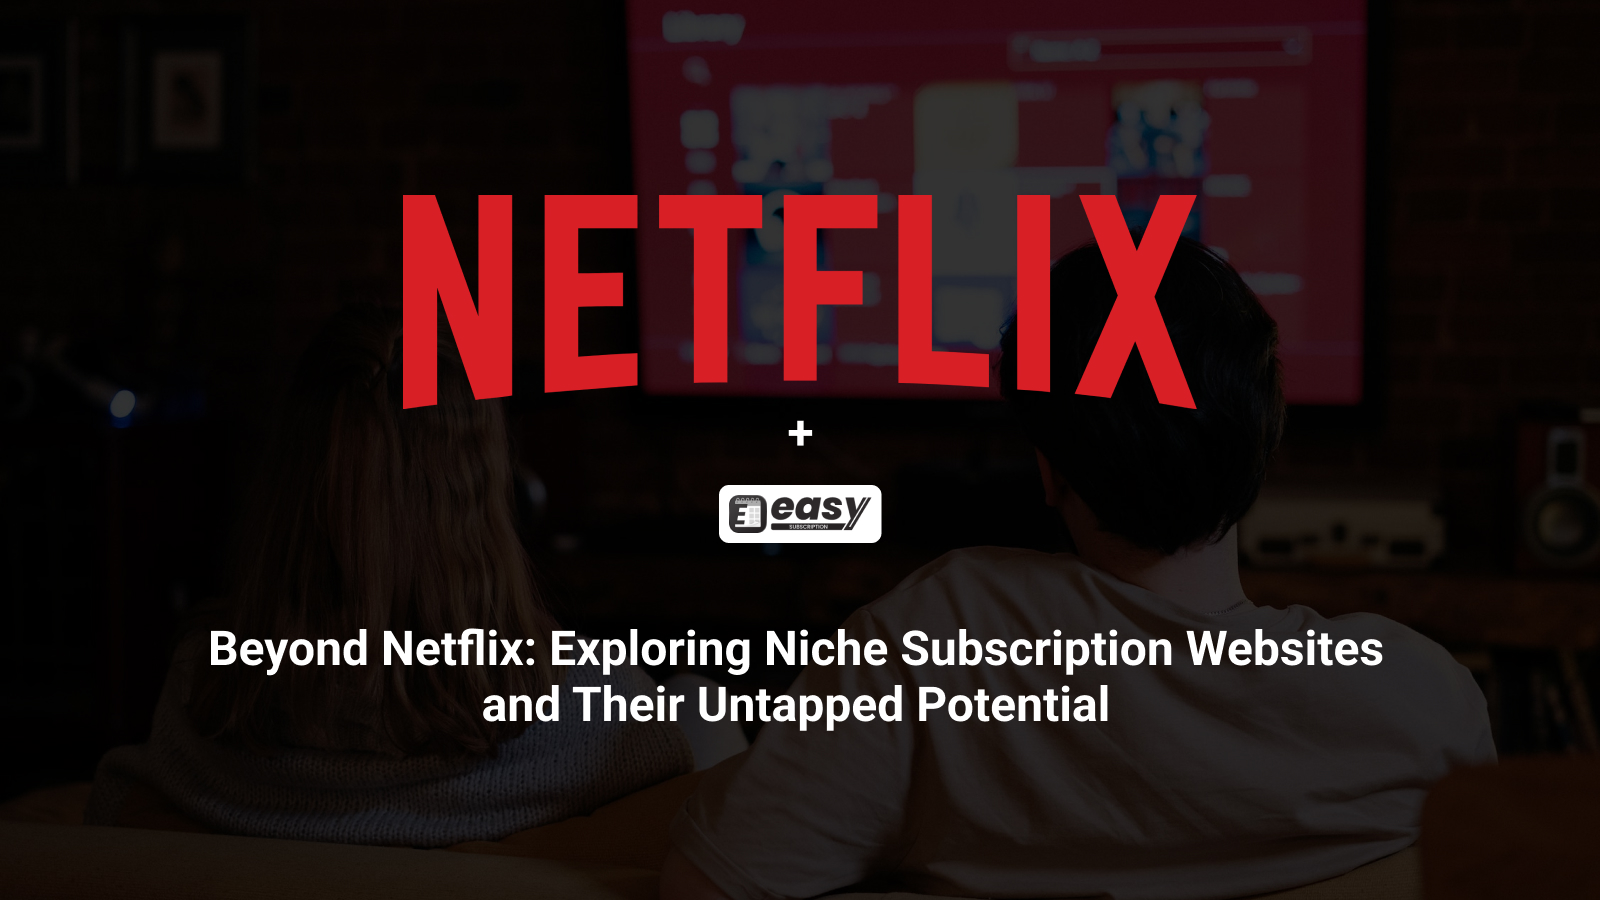 Beyond Netflix: Exploring Niche Subscription Websites and Their Untapped Potential